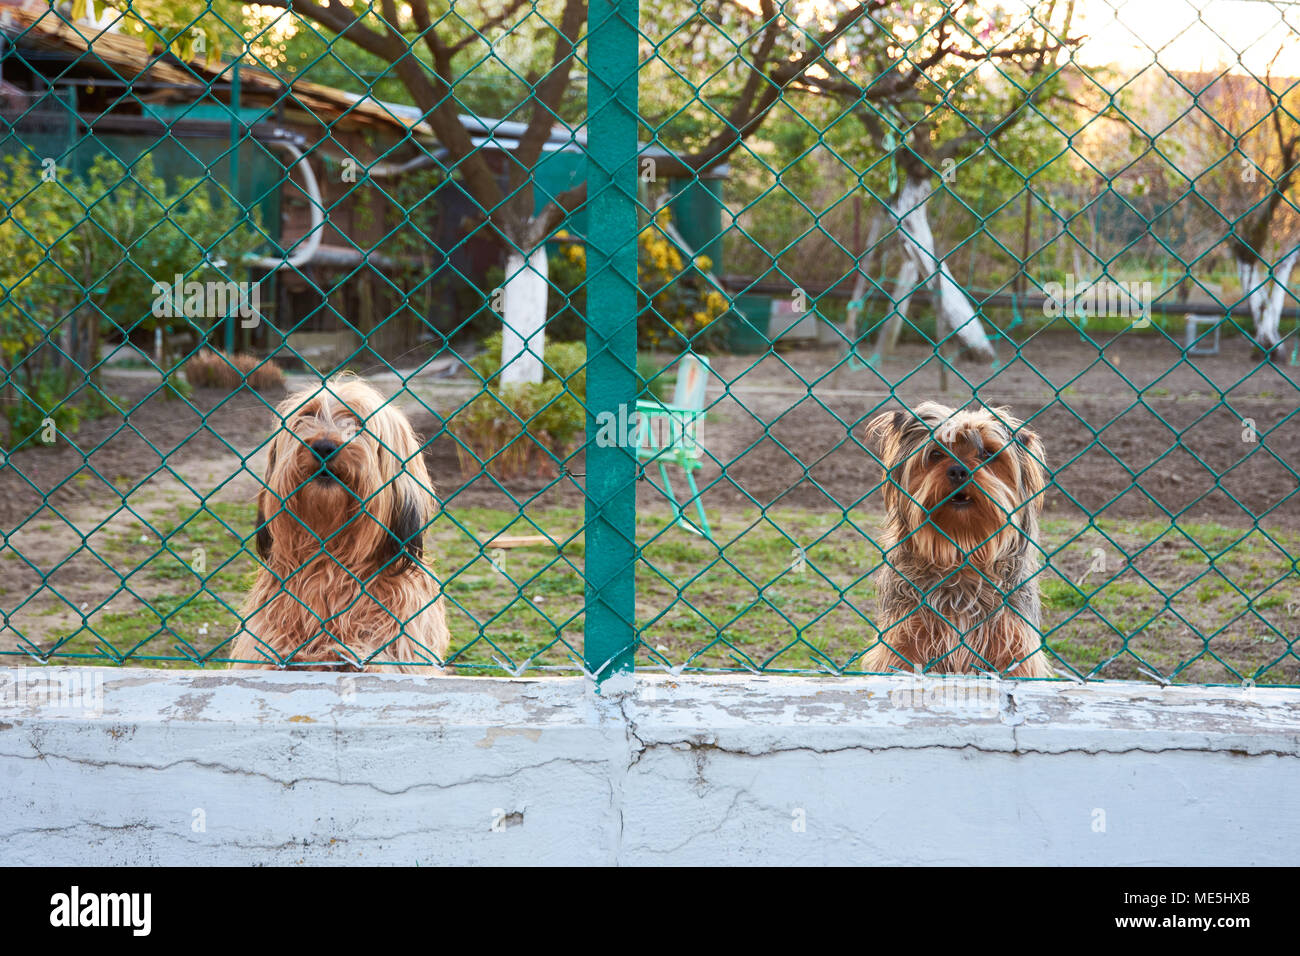 Two watchful and barking dogs behind a fence in the garden Stock Photo